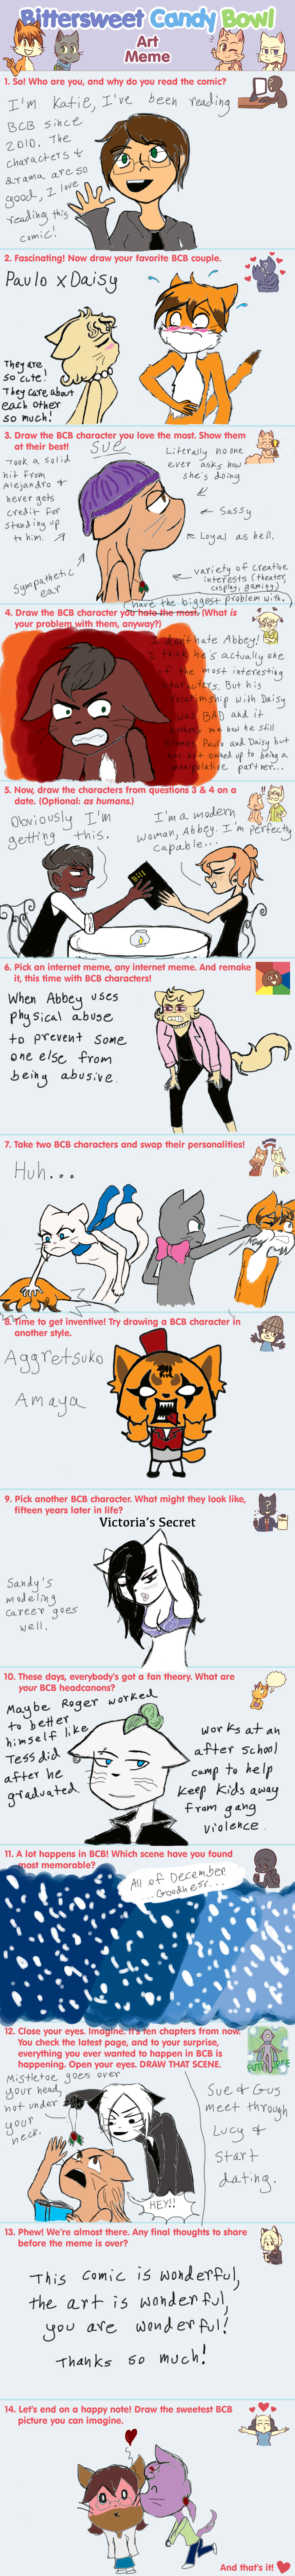 Candybooru image #13552, tagged with Abbey AbbeyxSue AugustusxSue BCB_Art_Meme Lucy MaddiexJessica Mike PauloxDaisy Roger Sandy Sue katie1113_(Artist)